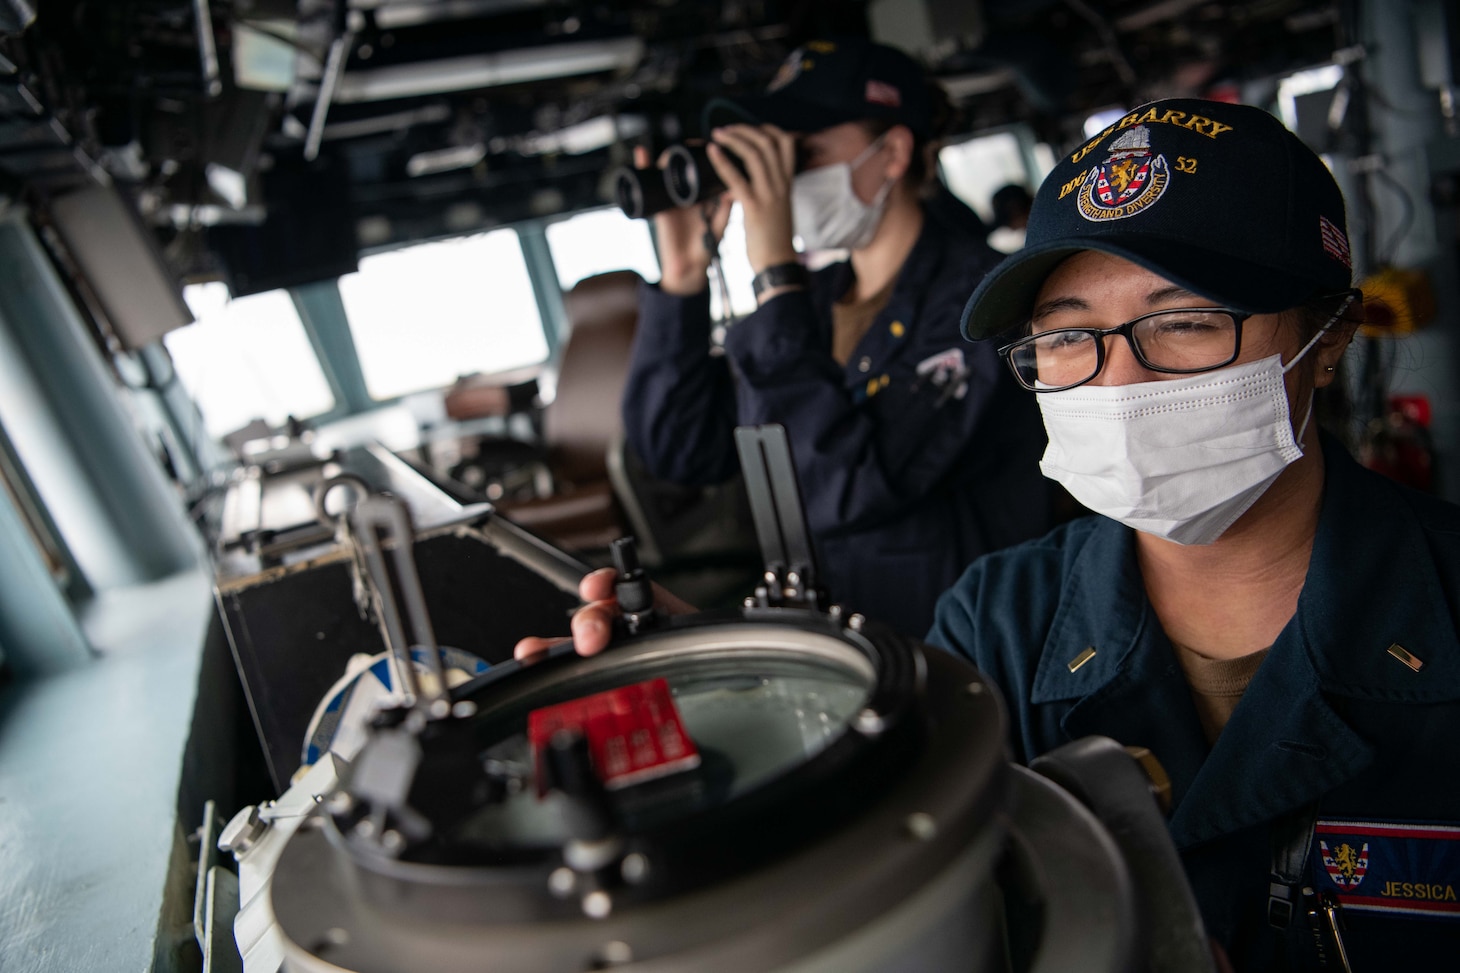 TAIWAN STRAIT (Nov. 20, 2020) – Ensign Jessica Cruz, from Virginia Beach, Va., shoots a line of bearing on the bridge of the guided-missile destroyer USS Barry (DDG 62) as the ship conducts routine underway operations in the Taiwan Strait. Barry is assigned to Destroyer Squadron (DESRON) 15, the Navy’s largest forward-deployed DESRON and the U.S. 7th Fleet's principal surface force, forward-deployed to the U.S. 7th Fleet area of operations in support of a free and open Indo-Pacific. (U.S. Navy photo by Lieutenant Junior Grade Samuel Hardgrove)